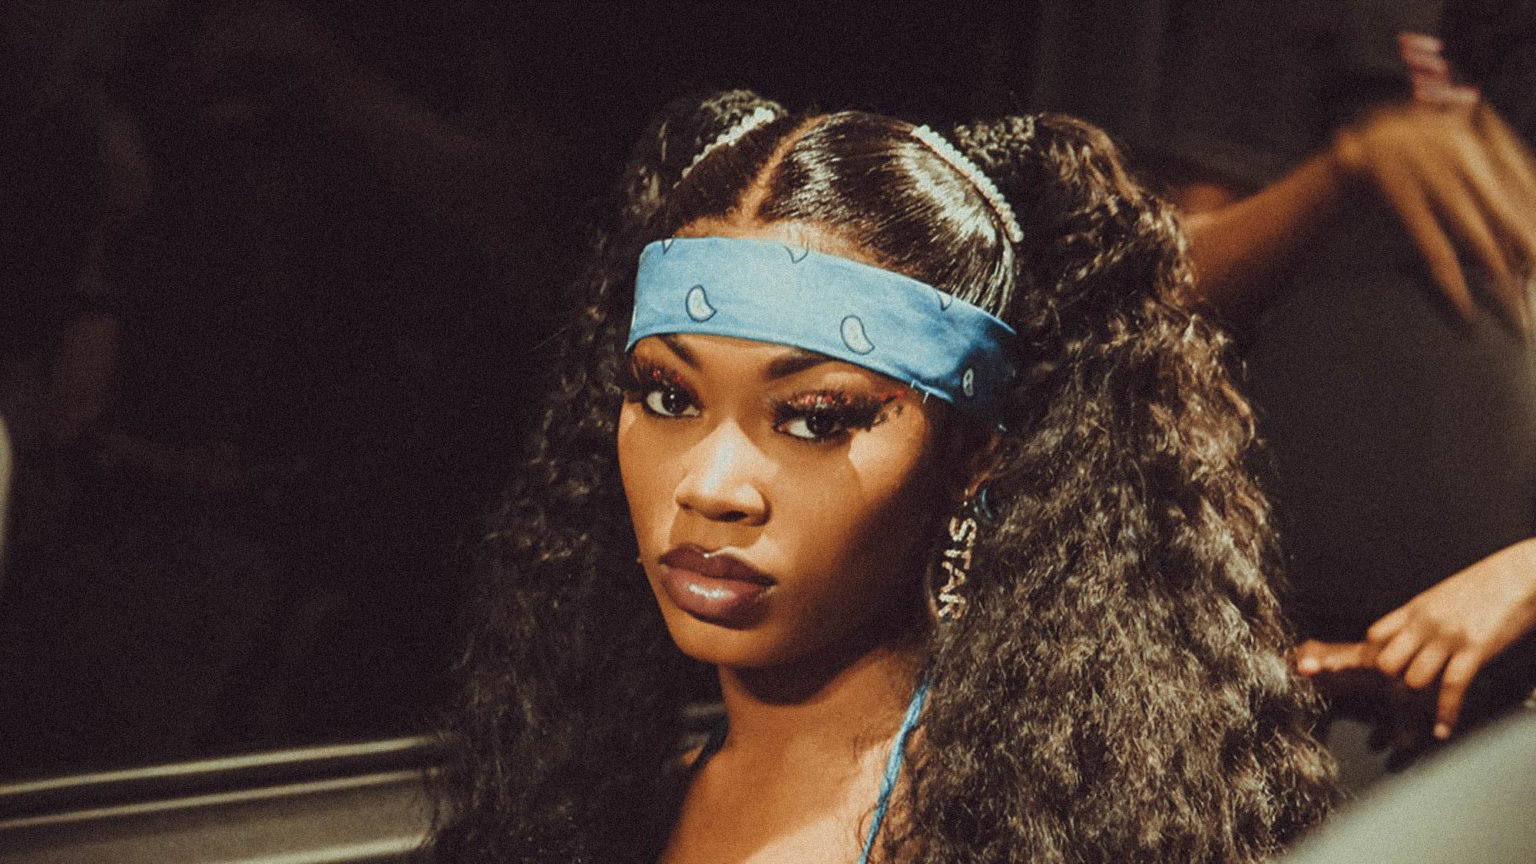 Asian Doll Podcast Walks Off After Host Disrespects Her Explained